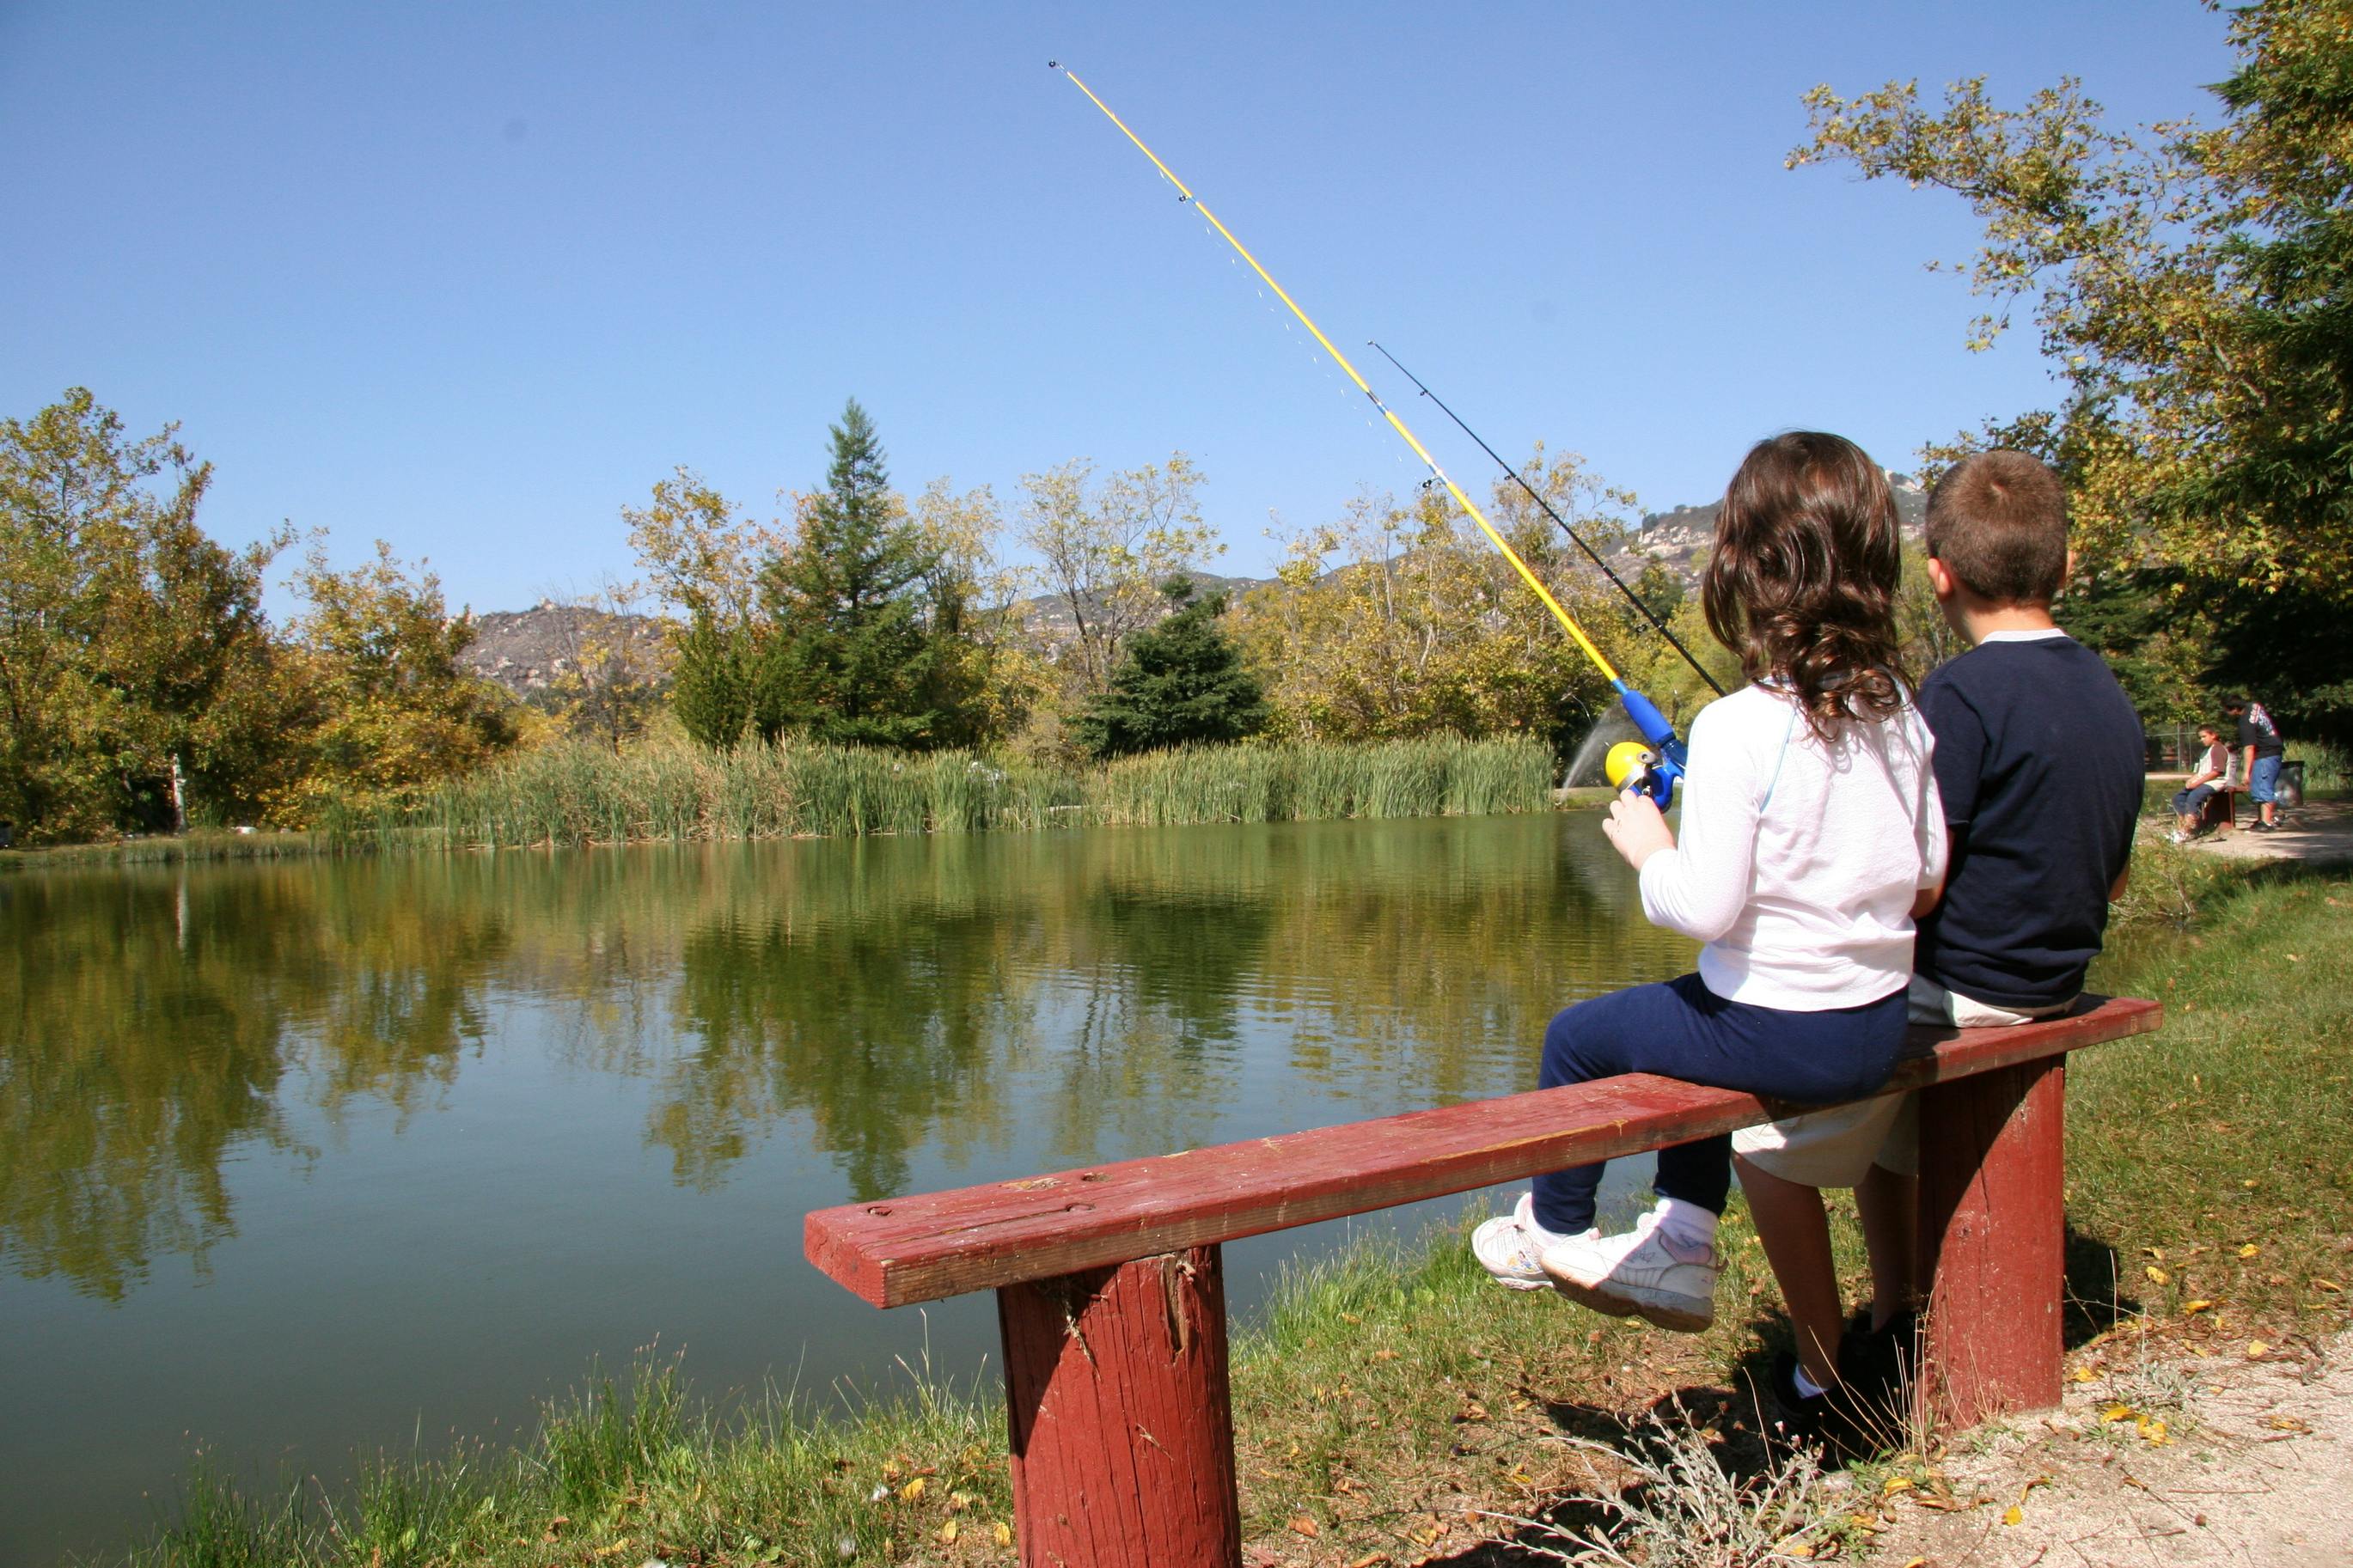 Two kids sitting on a bench holding fishing poles by a lake